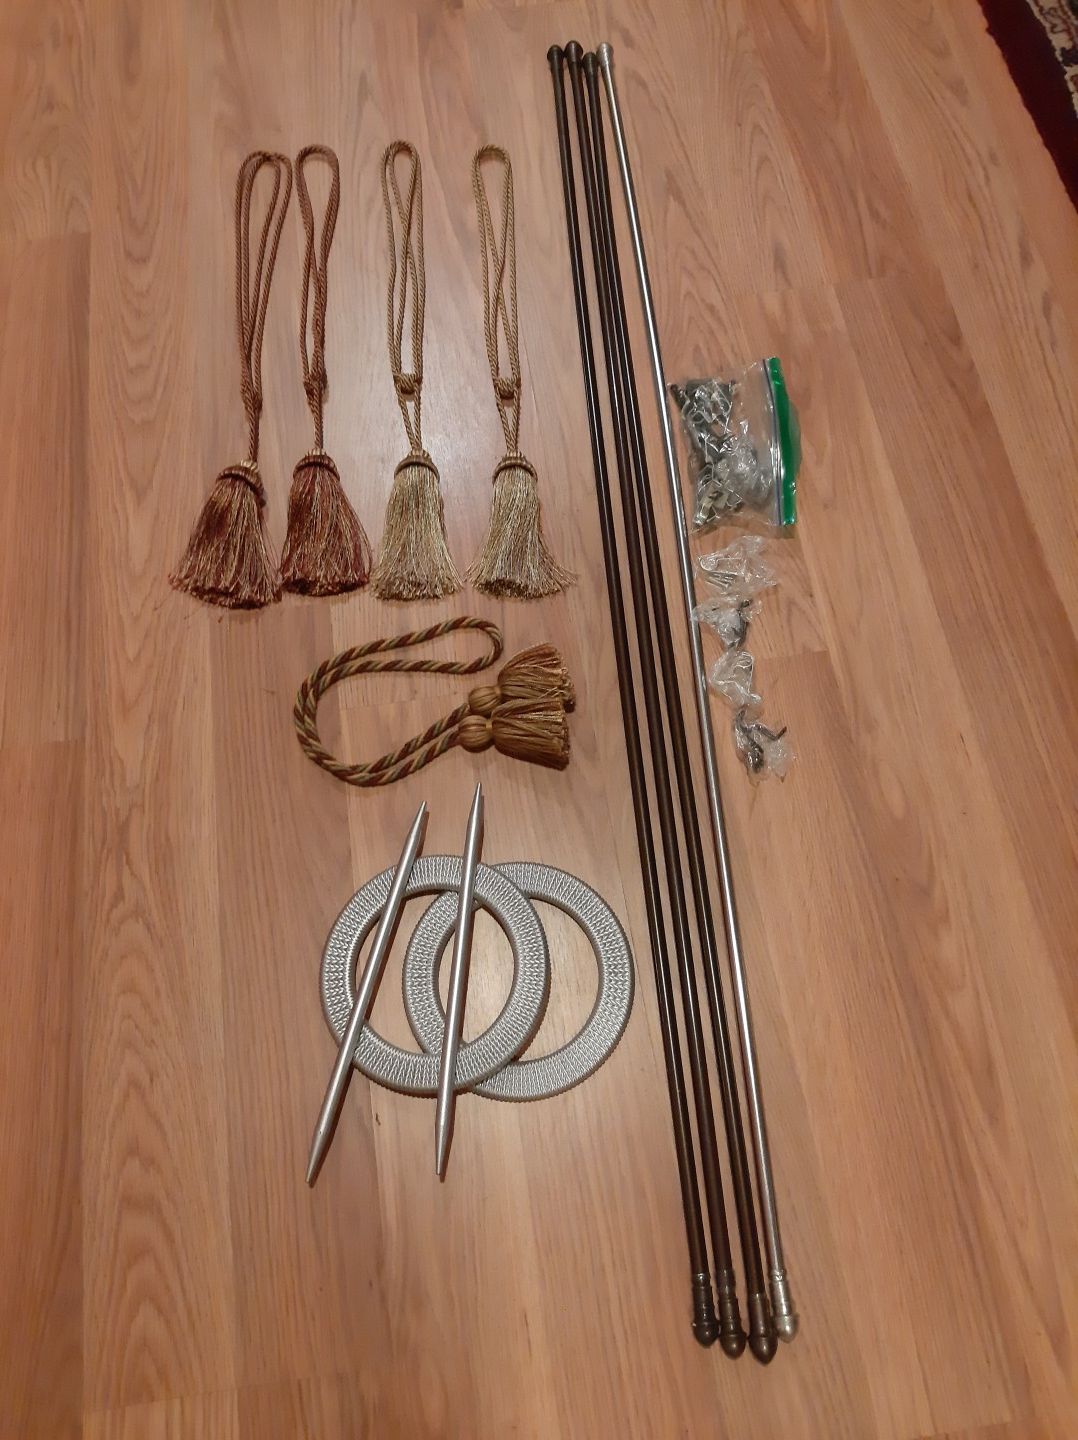 Curtain rods, holders and tied backs rope curtains.